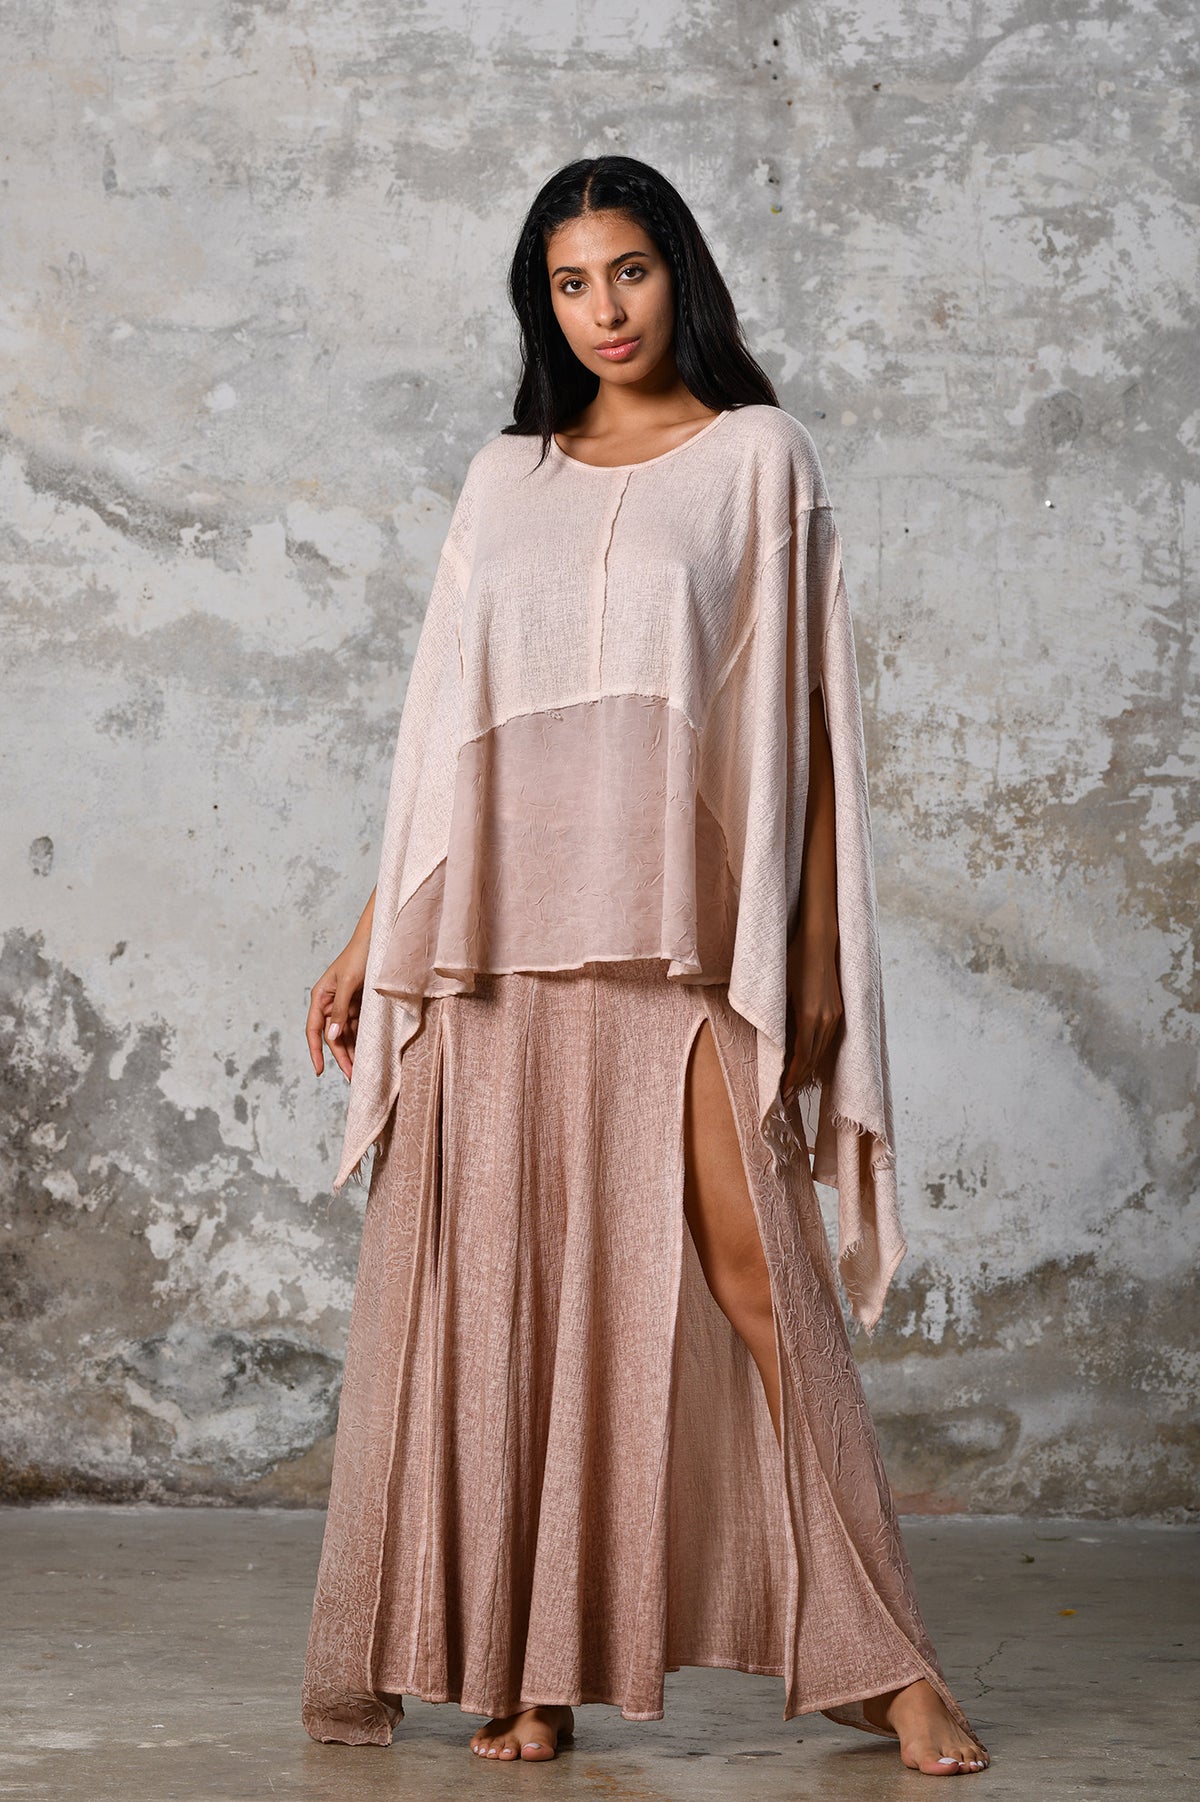 An enchanting Bohemian Leila, perfect for boho and festival-inspired looks, exuding a goddess-like quality. dusty pink bohemian style perfect for Burning Man and other occasions. Menswear Boho Shirt. Boho sleeveless poncho unisex